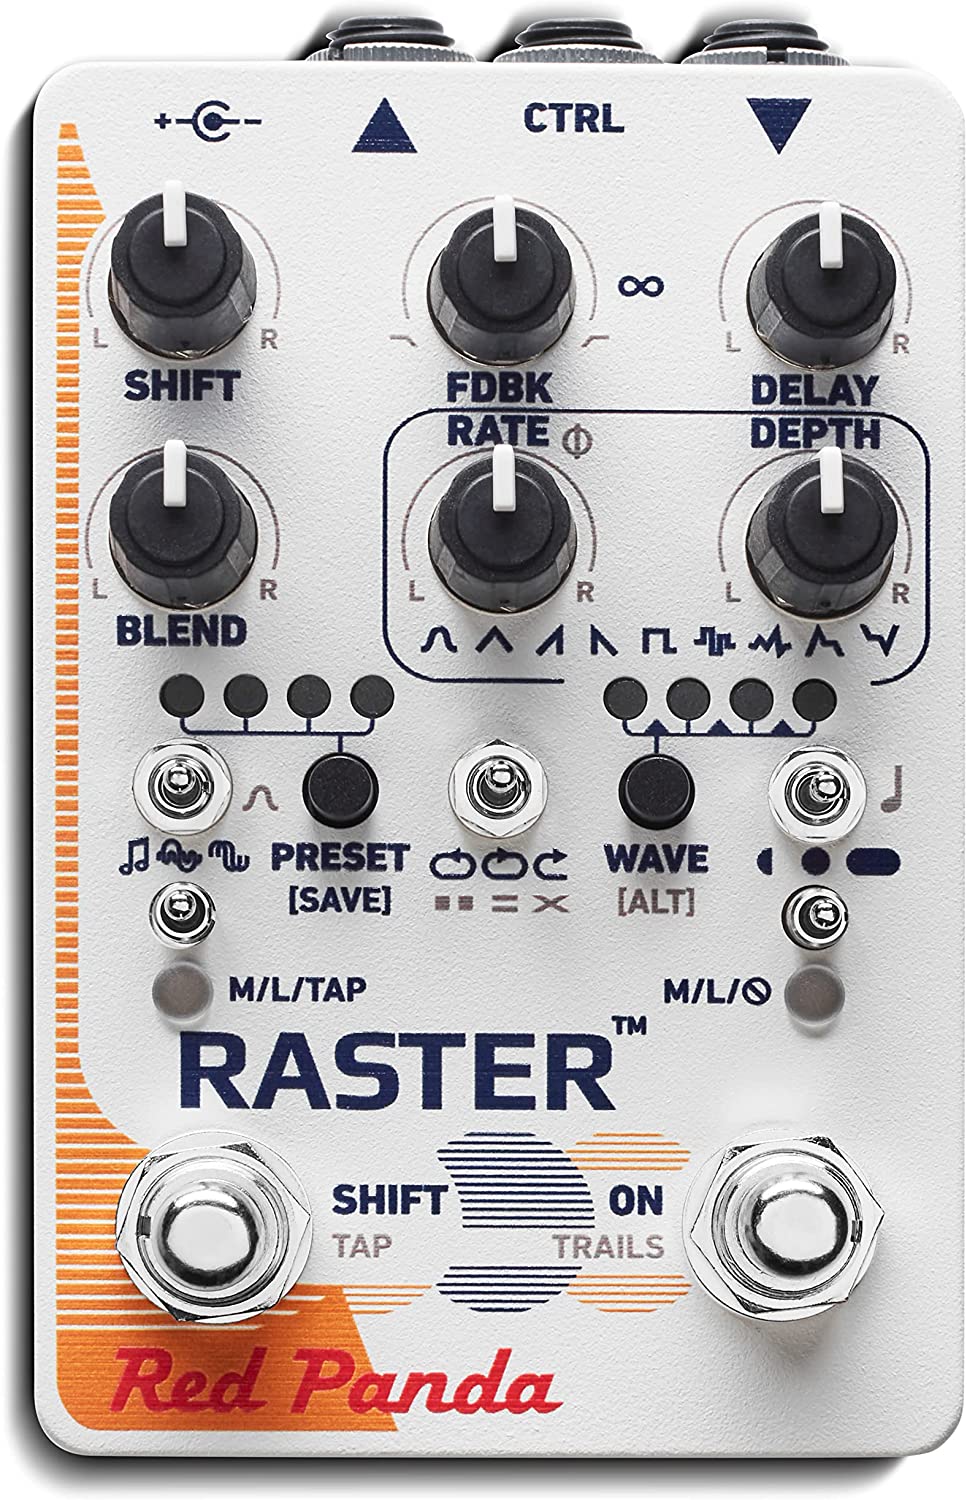 Red Panda Raster 2 Delay Pedal with Pitch Shifting on a white background